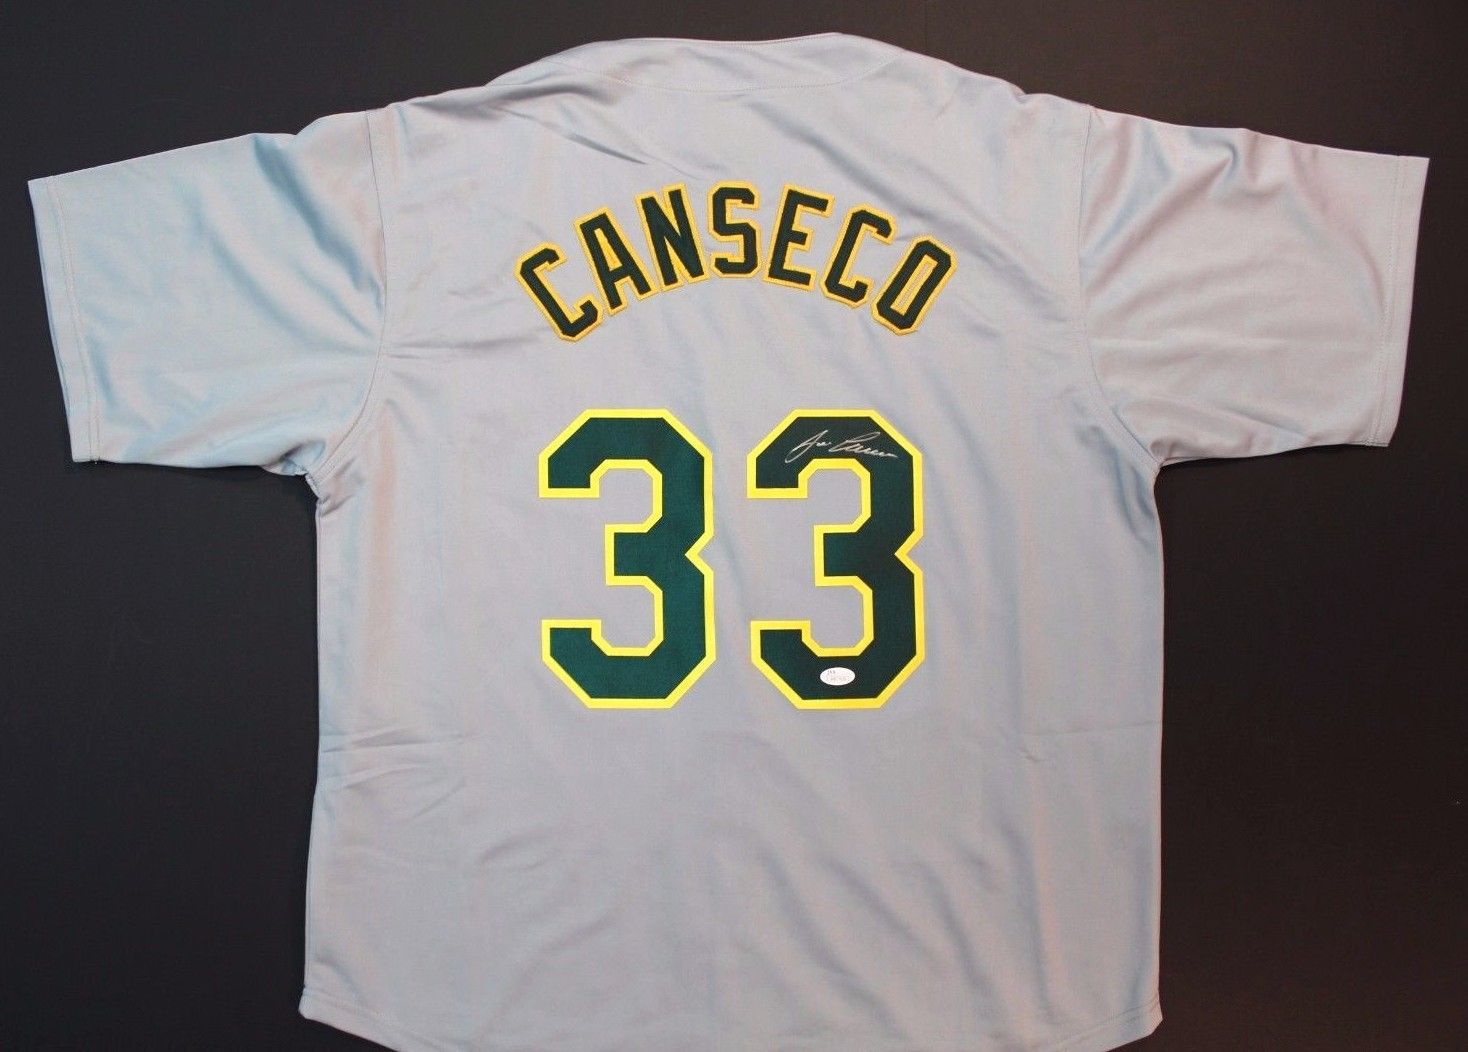 Jose Canseco Signed Jersey (JSA)